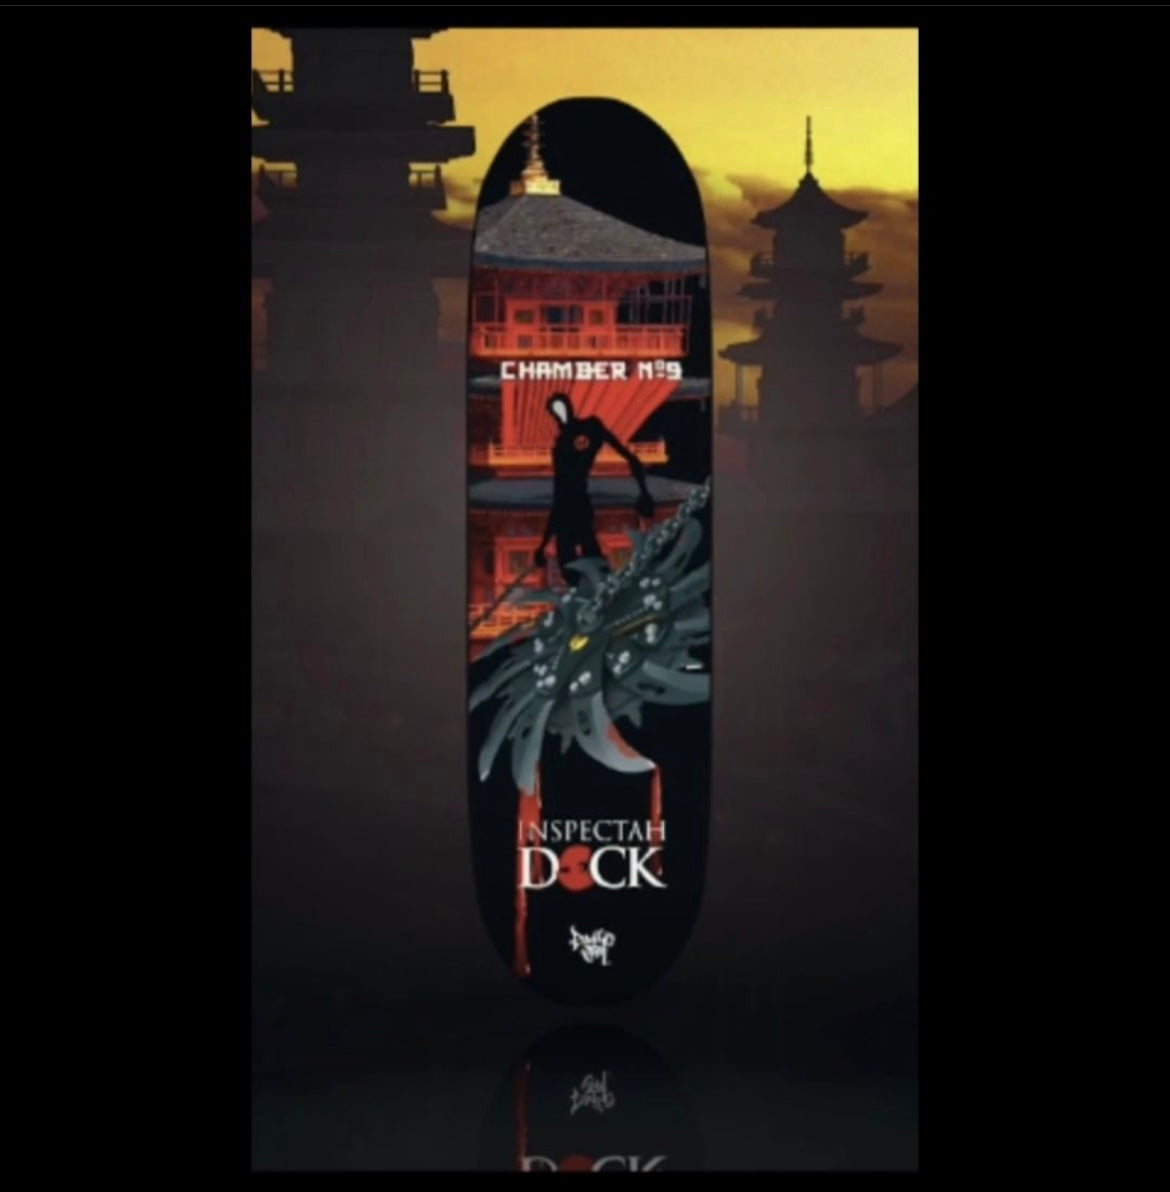 LIMITED EDITION* AUTOGRAPHED CHAMBER NO. 9 SKATEBOARD